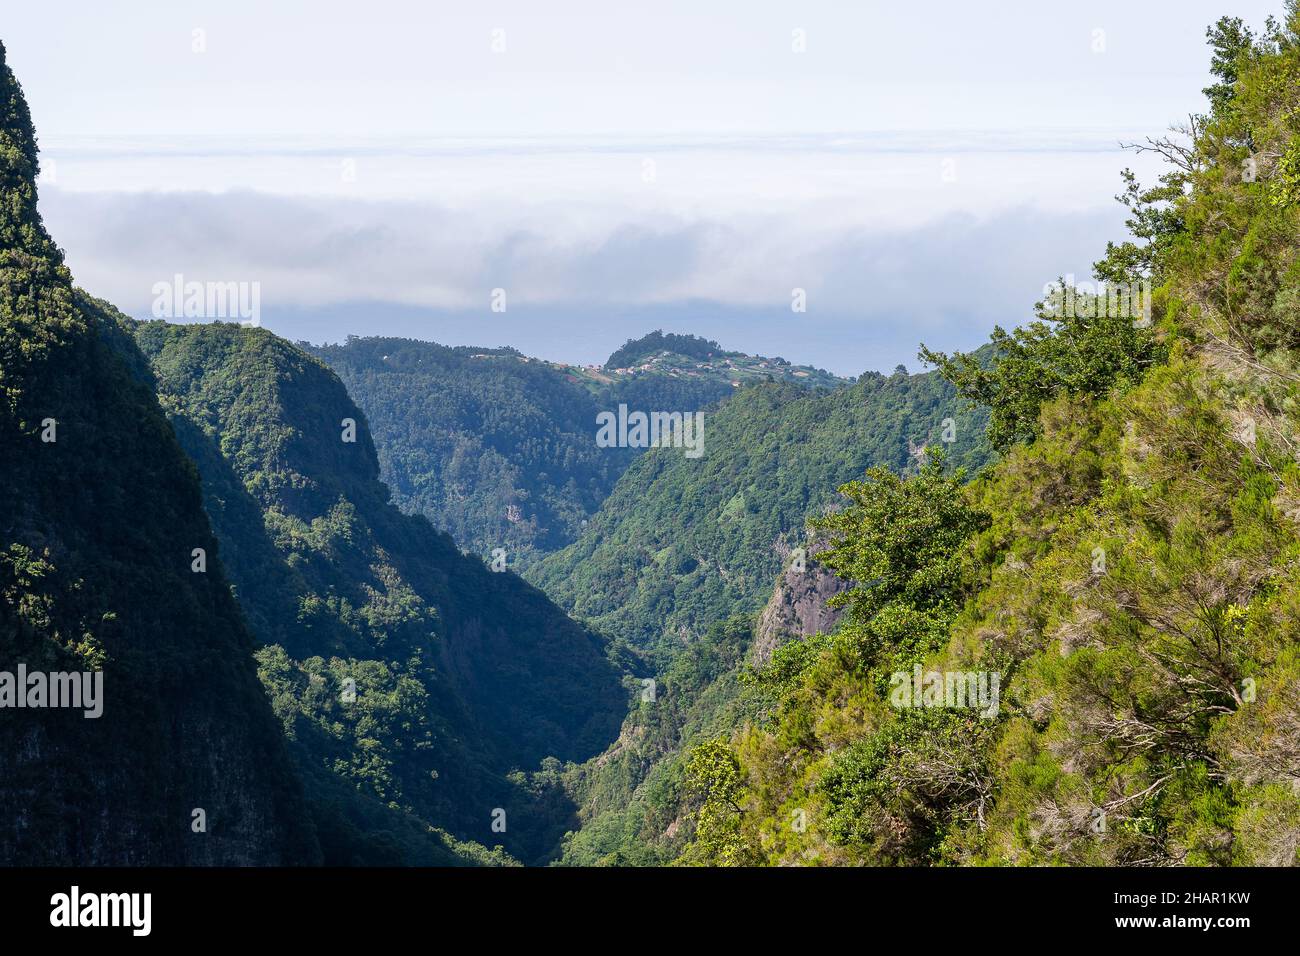 Mountain landscape. View of mountains on the route Queimadas Forestry Park - Caldeirao Verde, Madeira Island, Portugal, Europe. Stock Photo